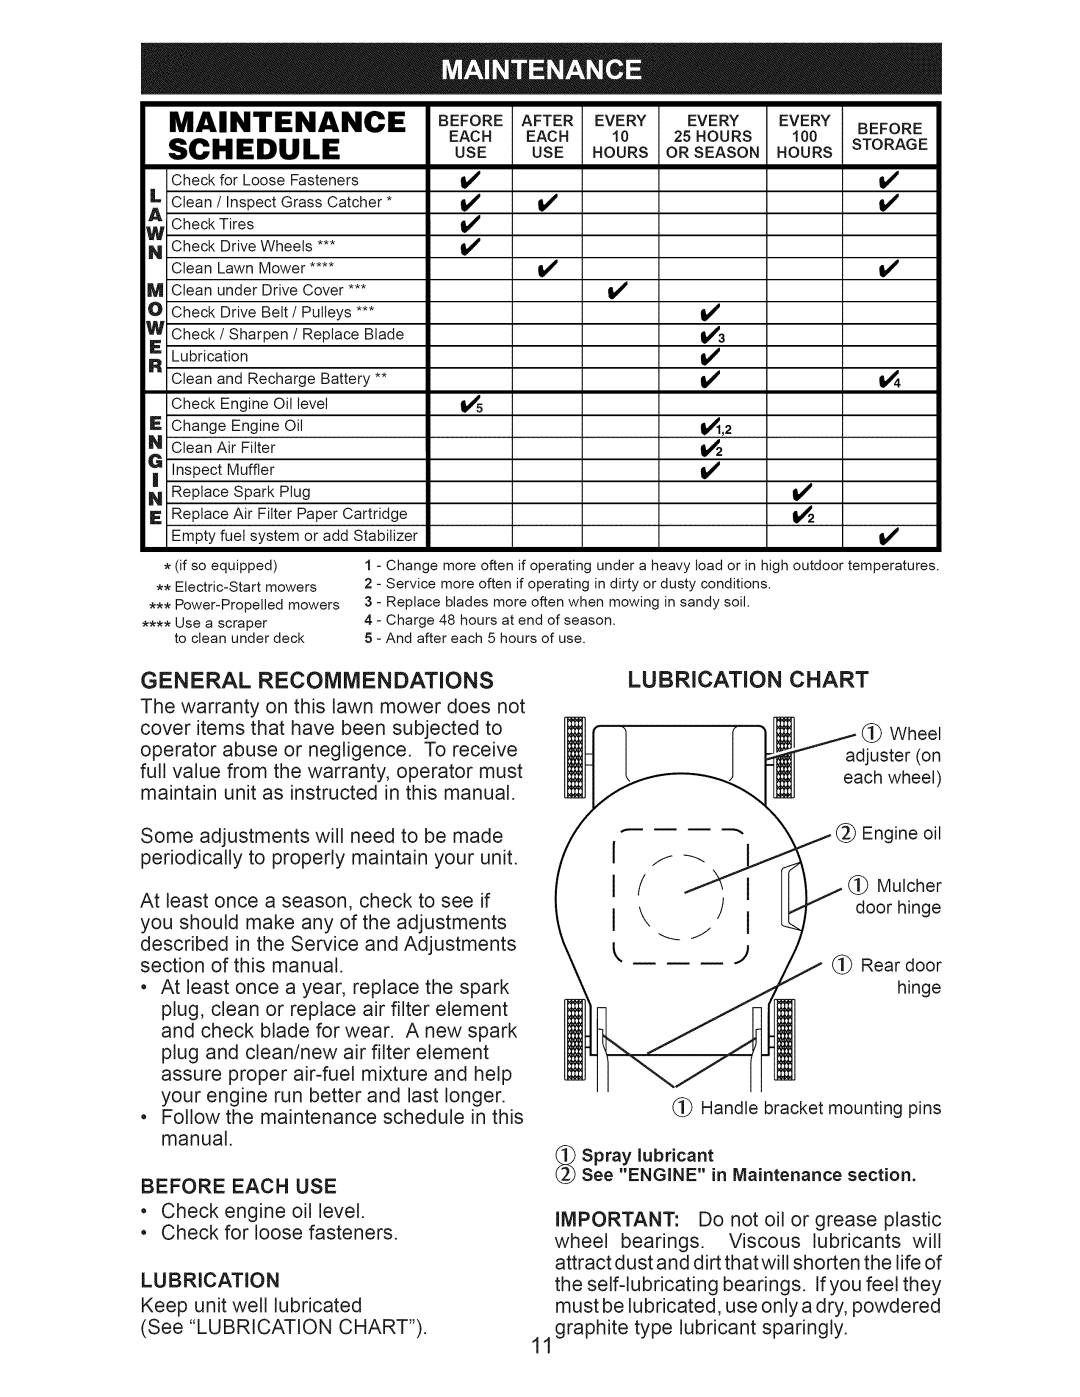 Craftsman 917.389062 owner manual Maintenance, Schedule, Use Hours 